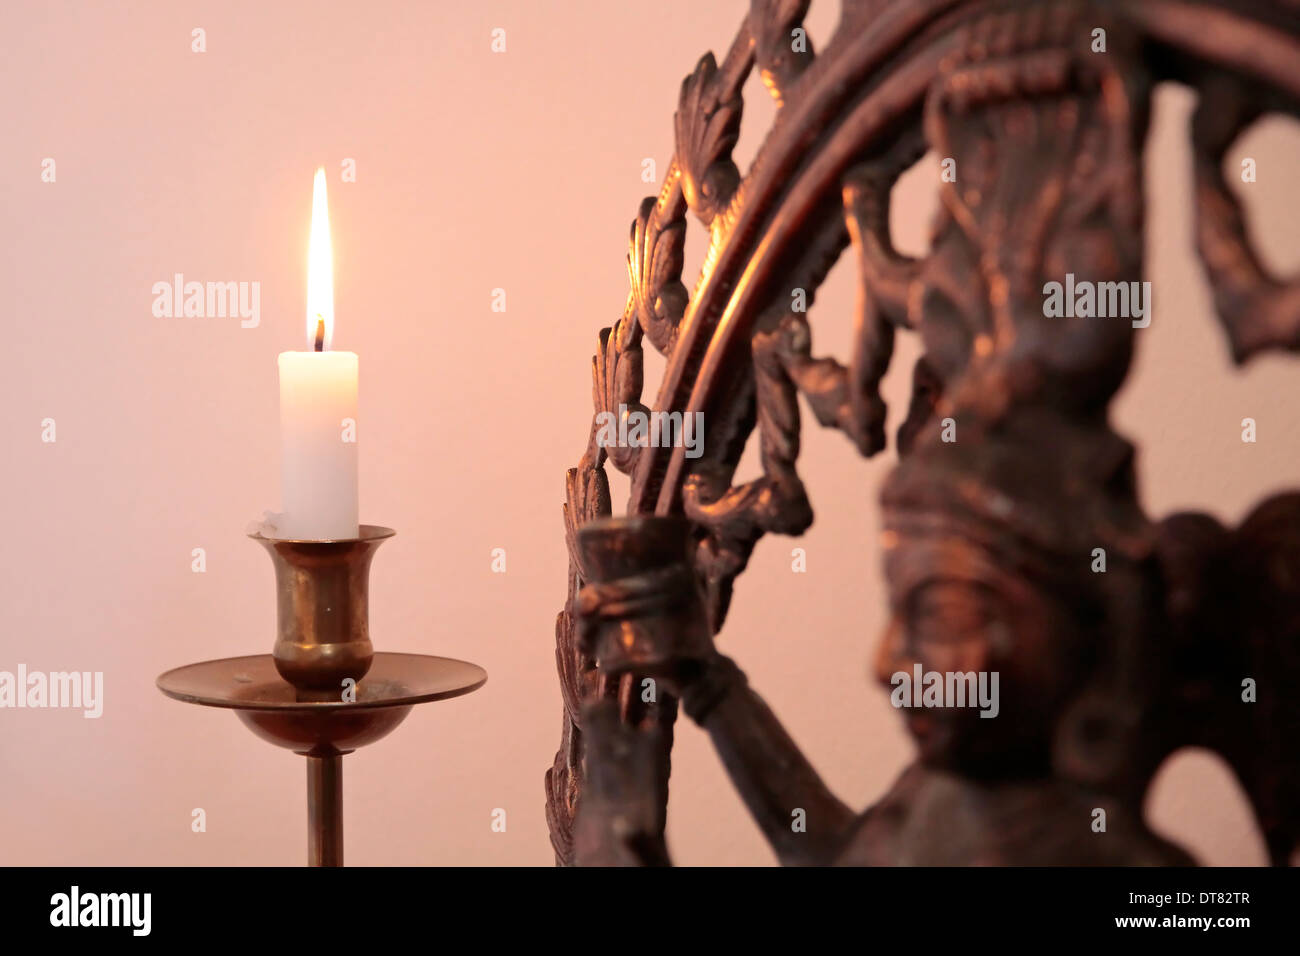 Statue of the goddess Shiva with candle as decoration in a yoga room Stock Photo